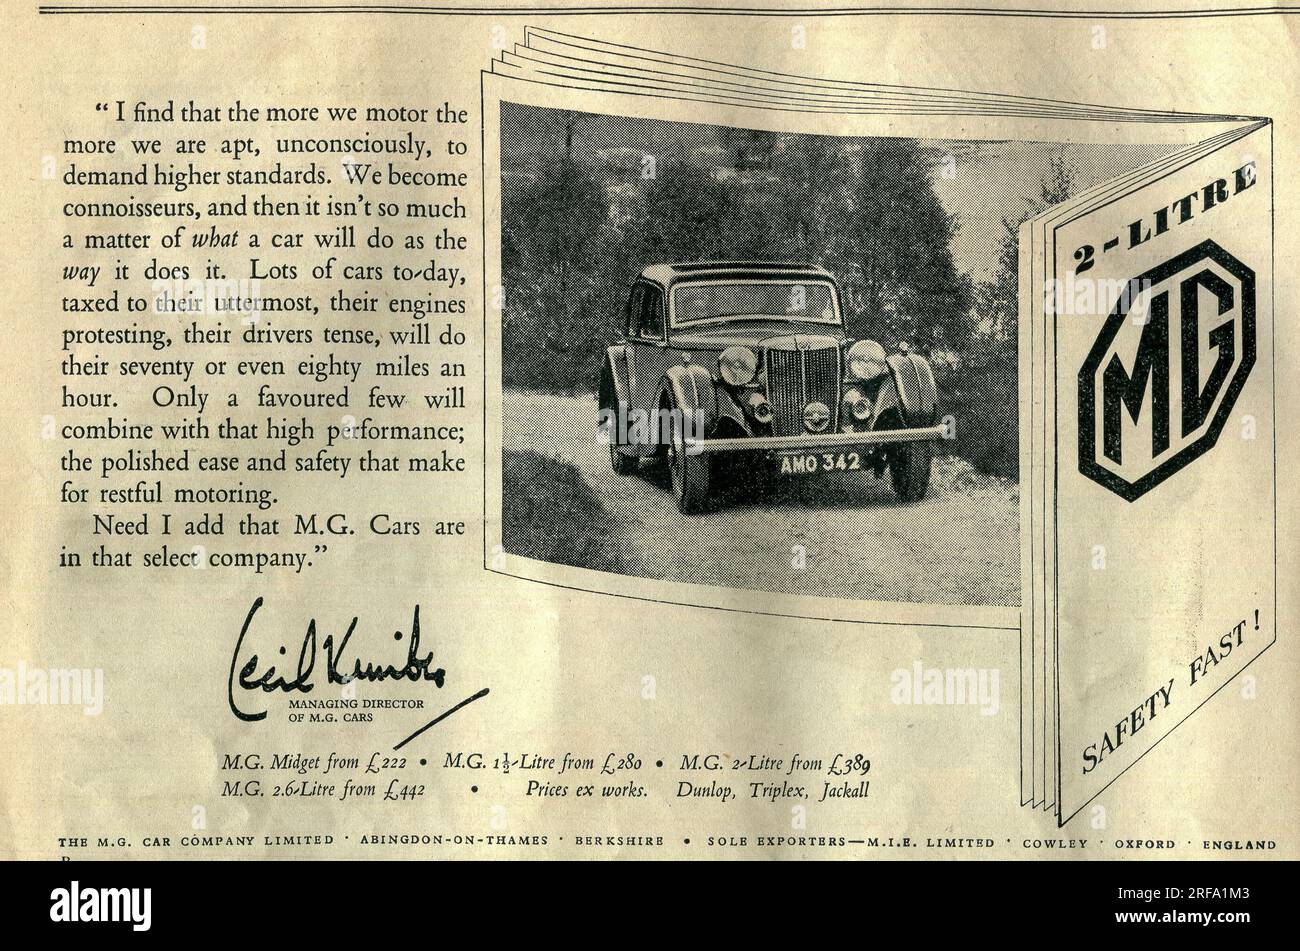 A 1938 historical magazine advertisement for MG motor cars signed by Cecil Kimble including the MG 2 Litre Stock Photo